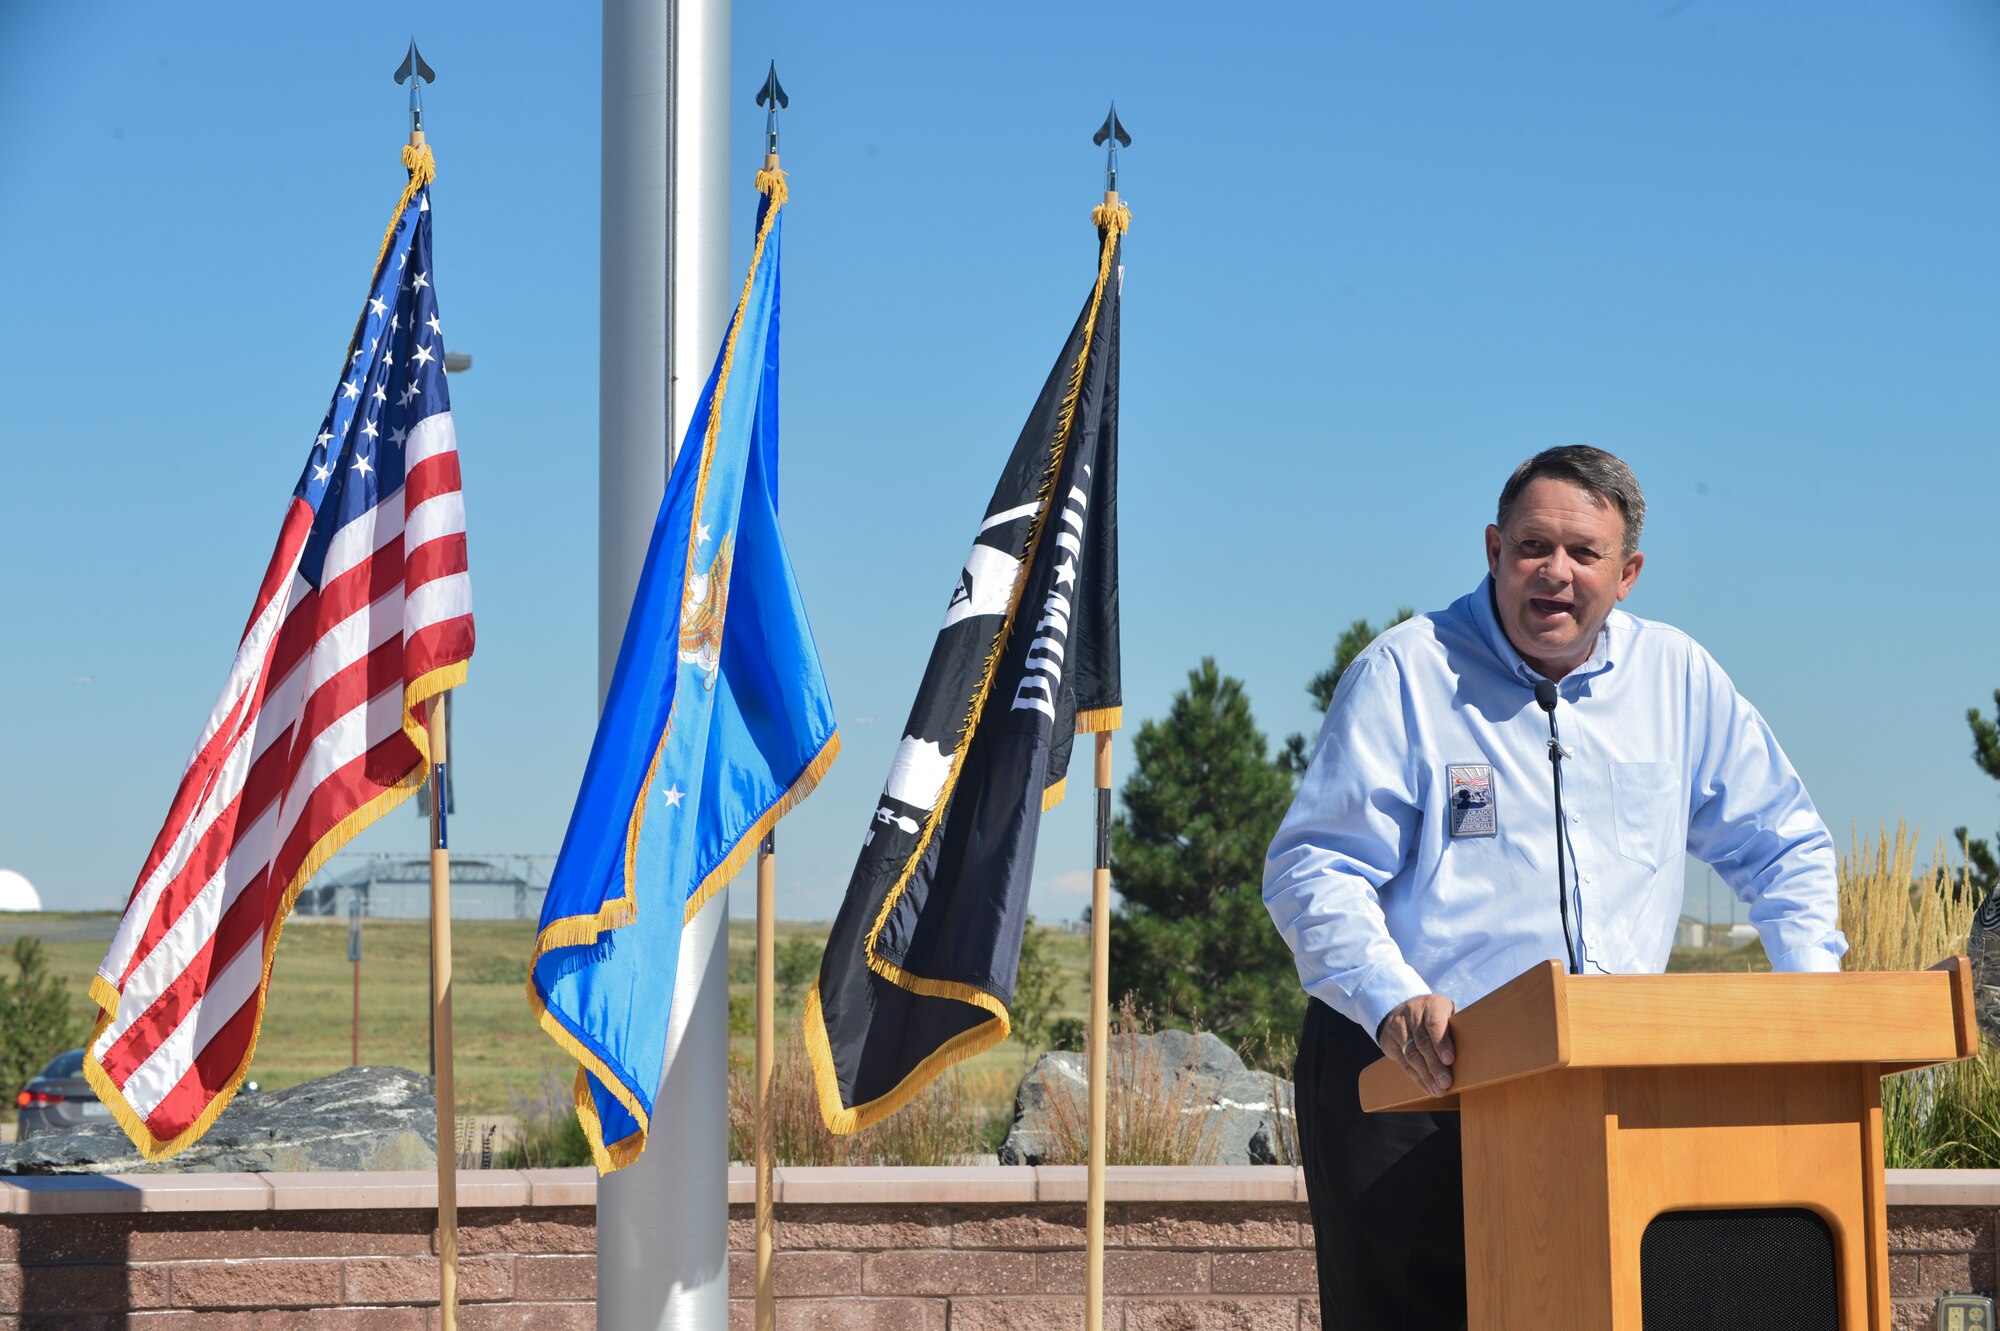 Rick Crandall, Colorado Freedom Memorial president, spoke during the National POW/MIA Recognition Day ceremony Sept. 20, 2013, at the 460th Space Wing headquarters building on Buckley Air Force Base, Colo. Crandall, an Air Force veteran, started the largest Veterans Day event in Denver known as the Veterans Salute.  (U.S. Air Force photo by Staff Sgt. Paul Labbe/Released)